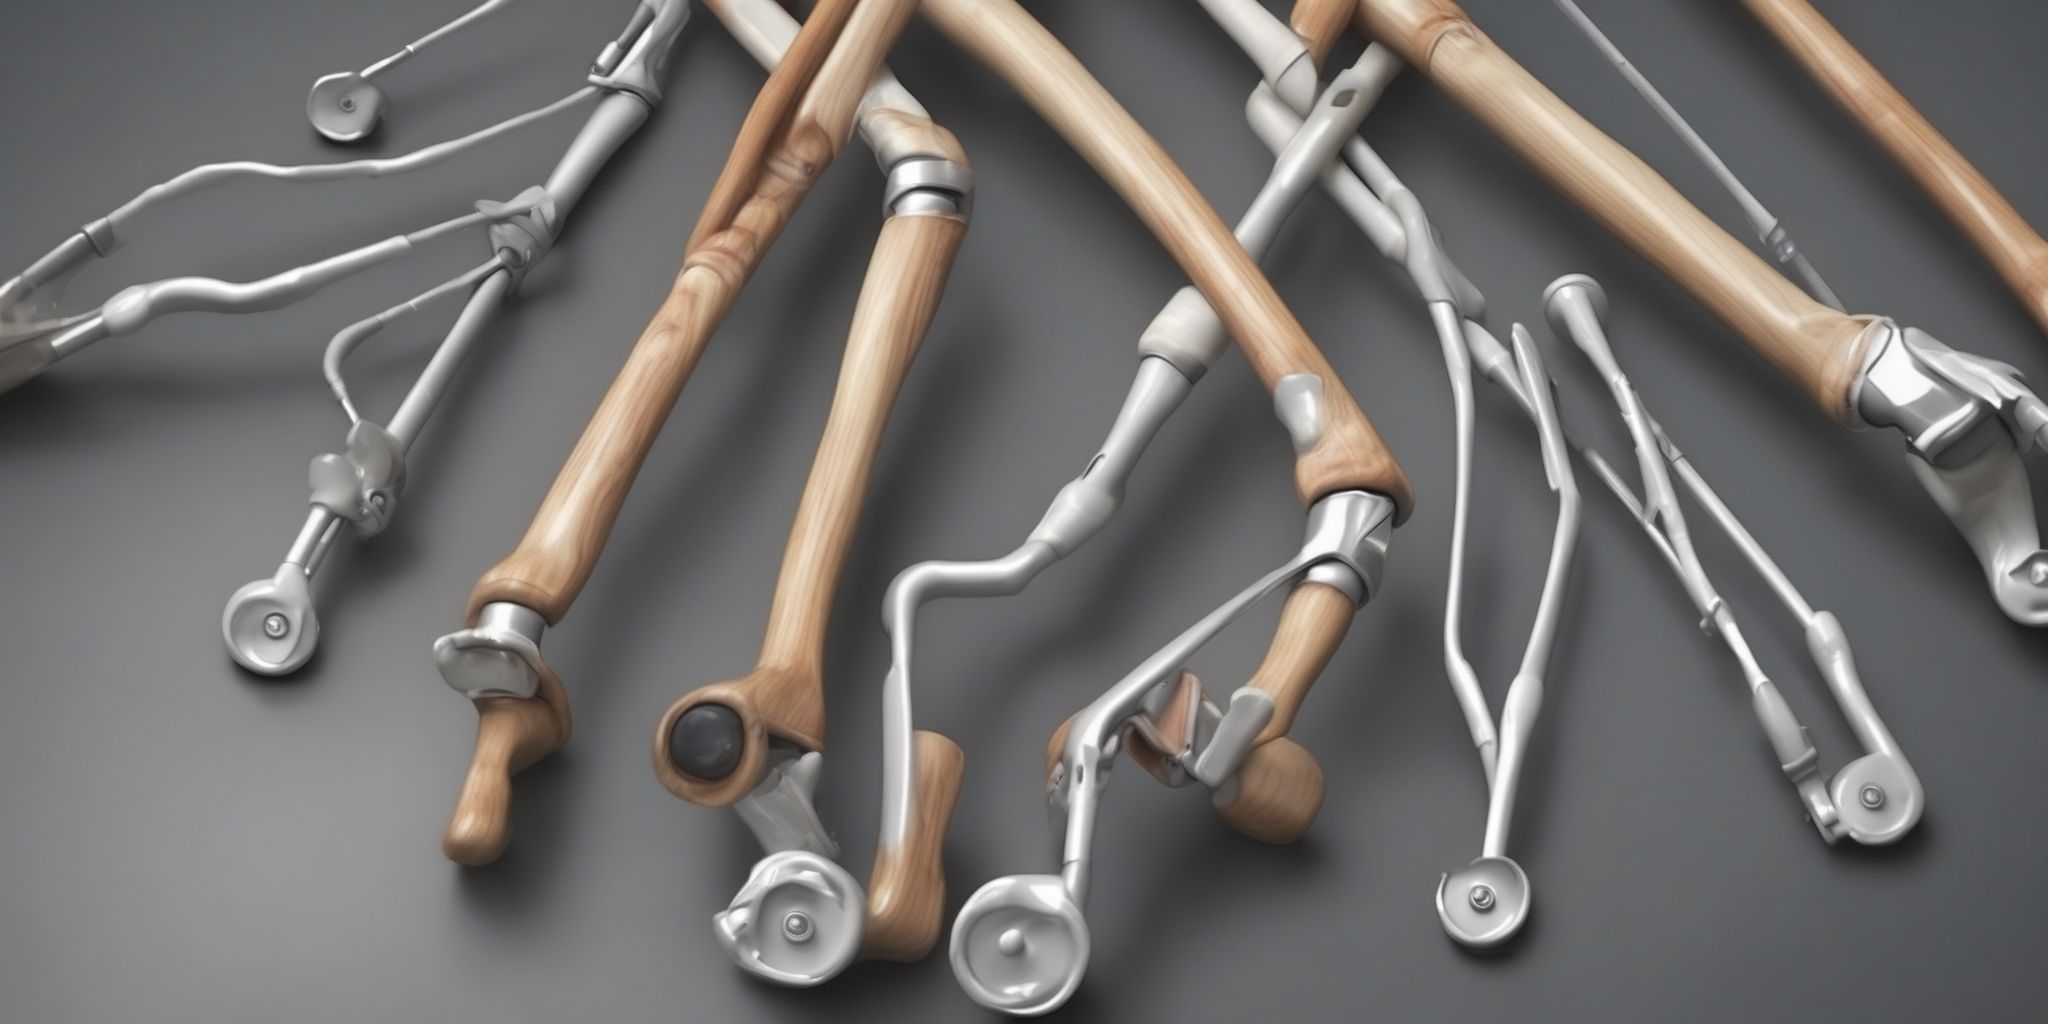 Crutches  in realistic, photographic style